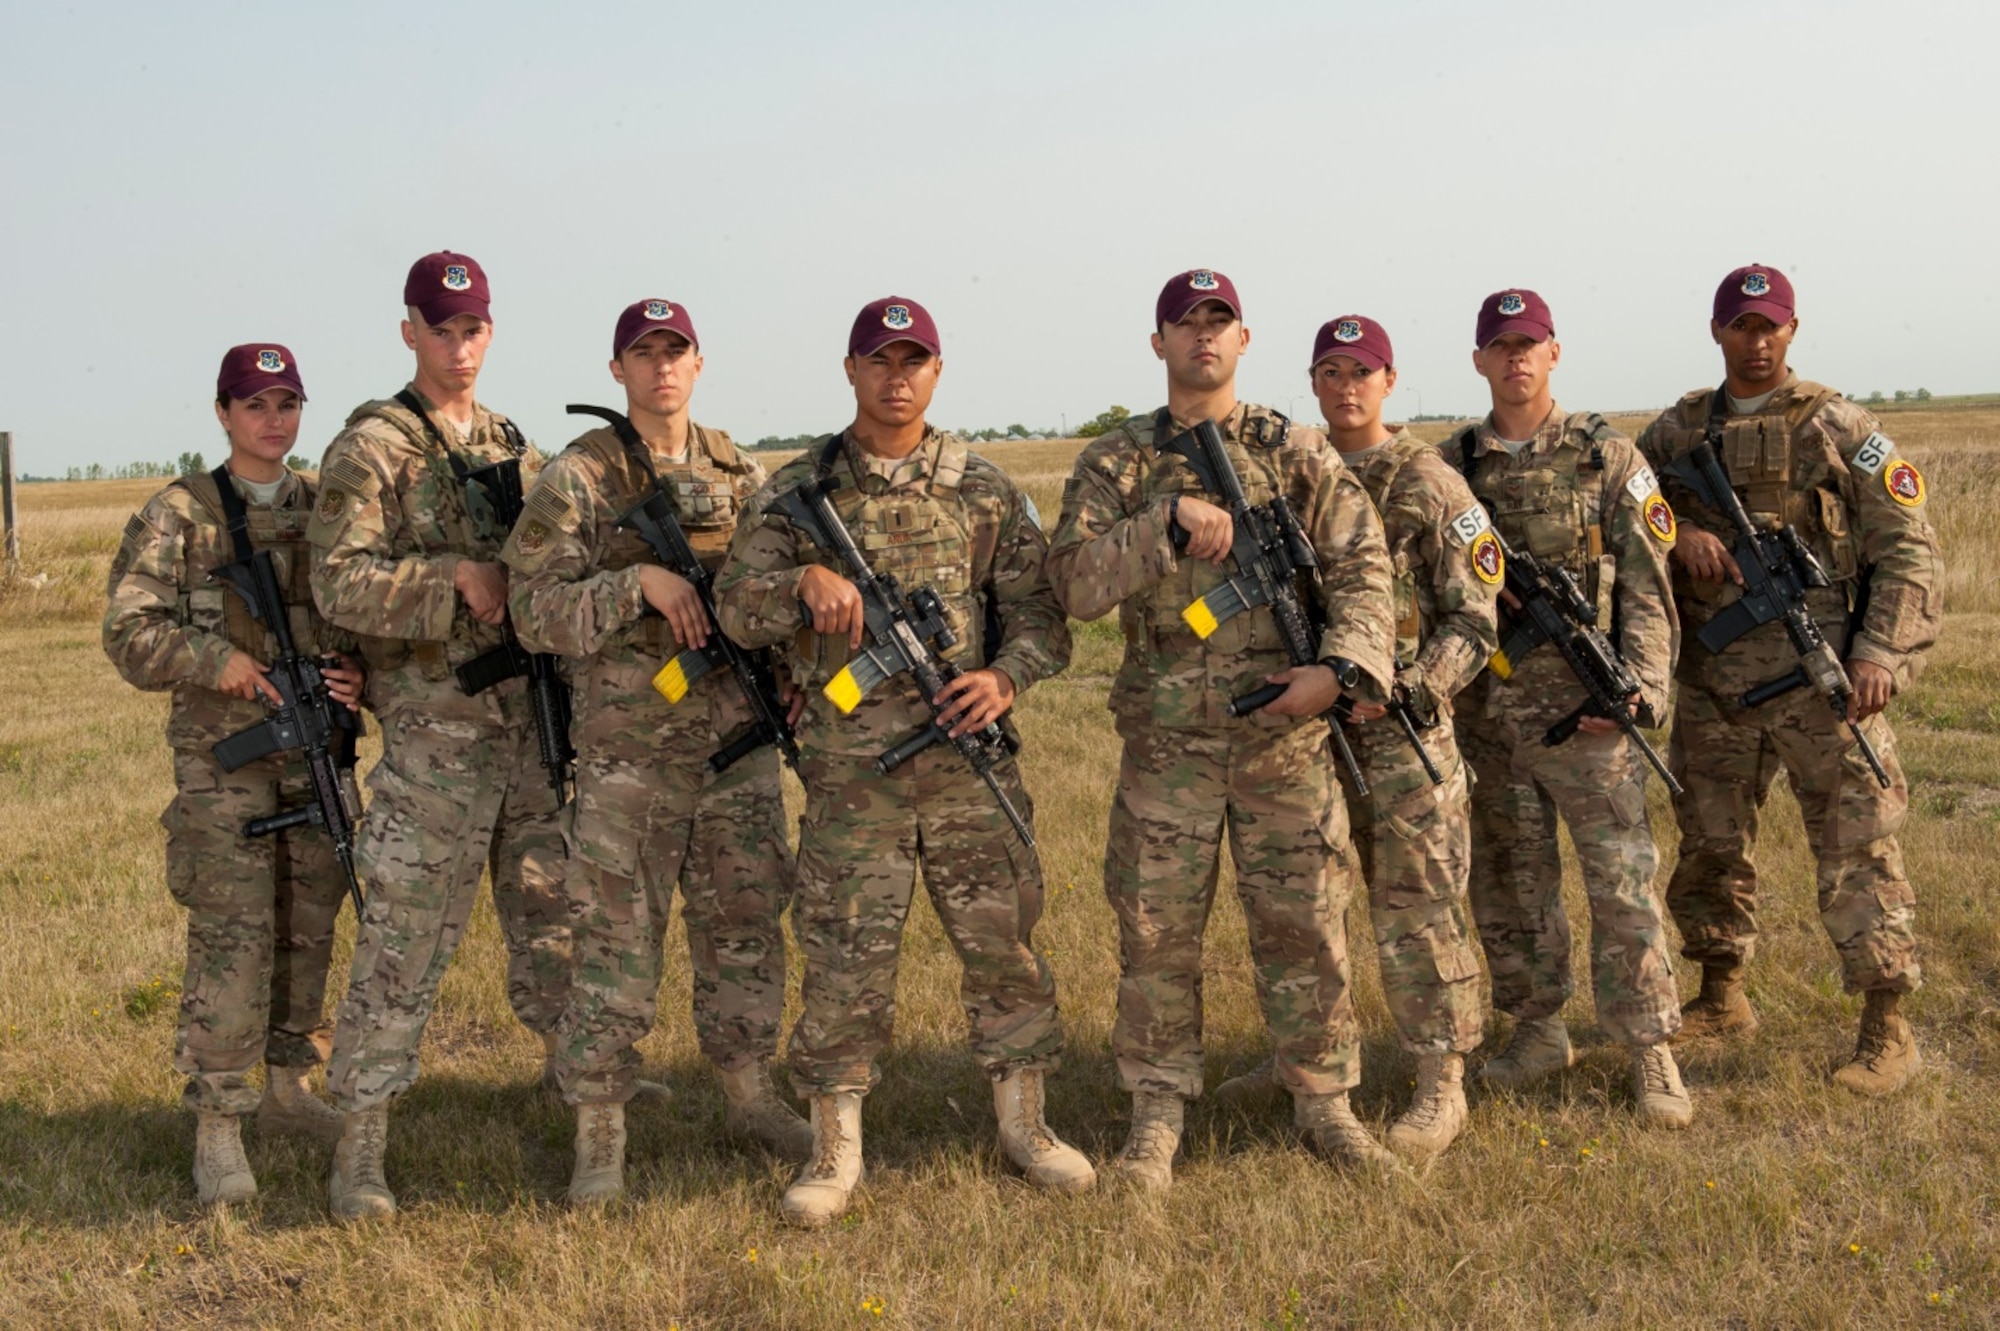 From left to right, Senior Airman Hannah Henry, Senior Airman Brandon Weese and Senior Airman Cody Poole, 91st Missile Security Forces Squadron Global Strike Challenge team members, 1st Lt. Kschristopher Anda and Staff Sgt. Jesse Koritar, 91st MSFS GSC team captains, Staff Sgt. Christina Lee, Staff Sgt. Michael Ray and Airman 1st Class Andreas Wiggins, 91st MSFS GSC team members, pose at Minot Air Force Base, N.D., Aug. 26, 2015. To train for Global Strike Challenge, the team has trained twice a day, along with working on their tactics and team work as well as going to the shoot house to practice with the M4 Carbine. Koritar thinks their dedication and training sets them apart from other teams and having two returning members from the 2014 GSC will help them win this year’s competition. (U.S. Air Force photo/Airman 1st Class Christian Sullivan)